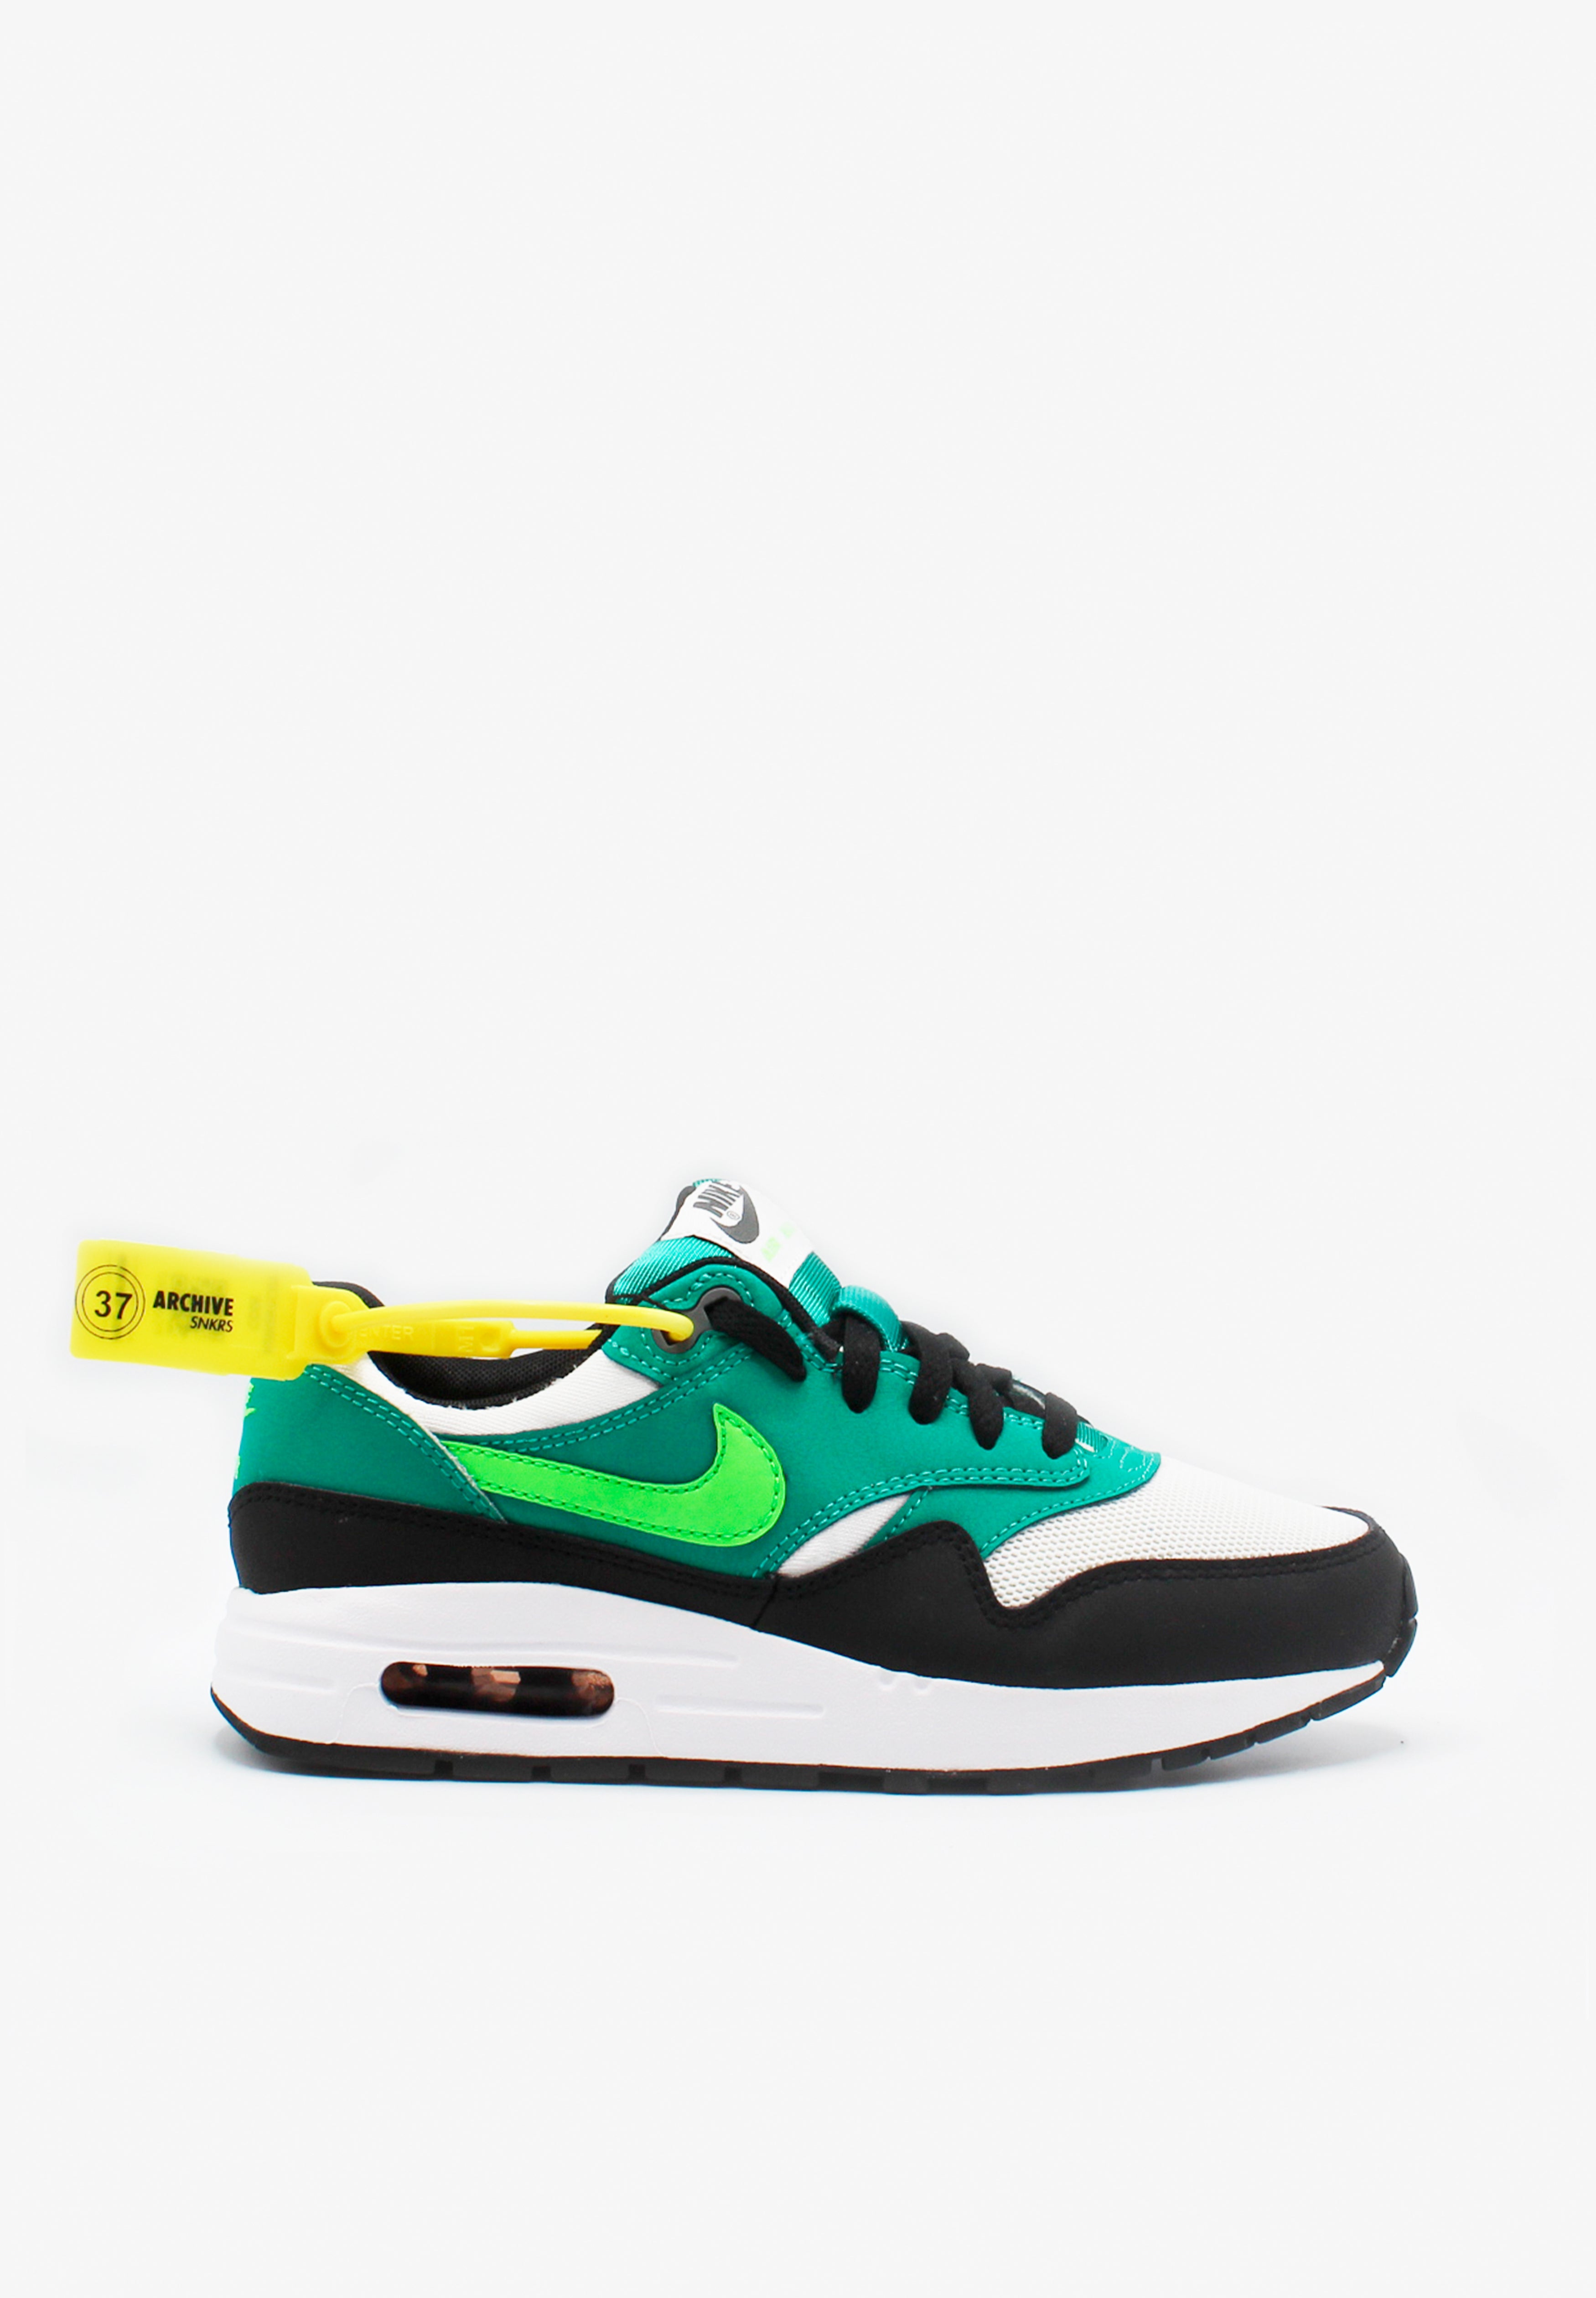 ARCHIVE SNEAKRS | SNEAKERS NIKE AIR MAX 1 TALLA 37.5